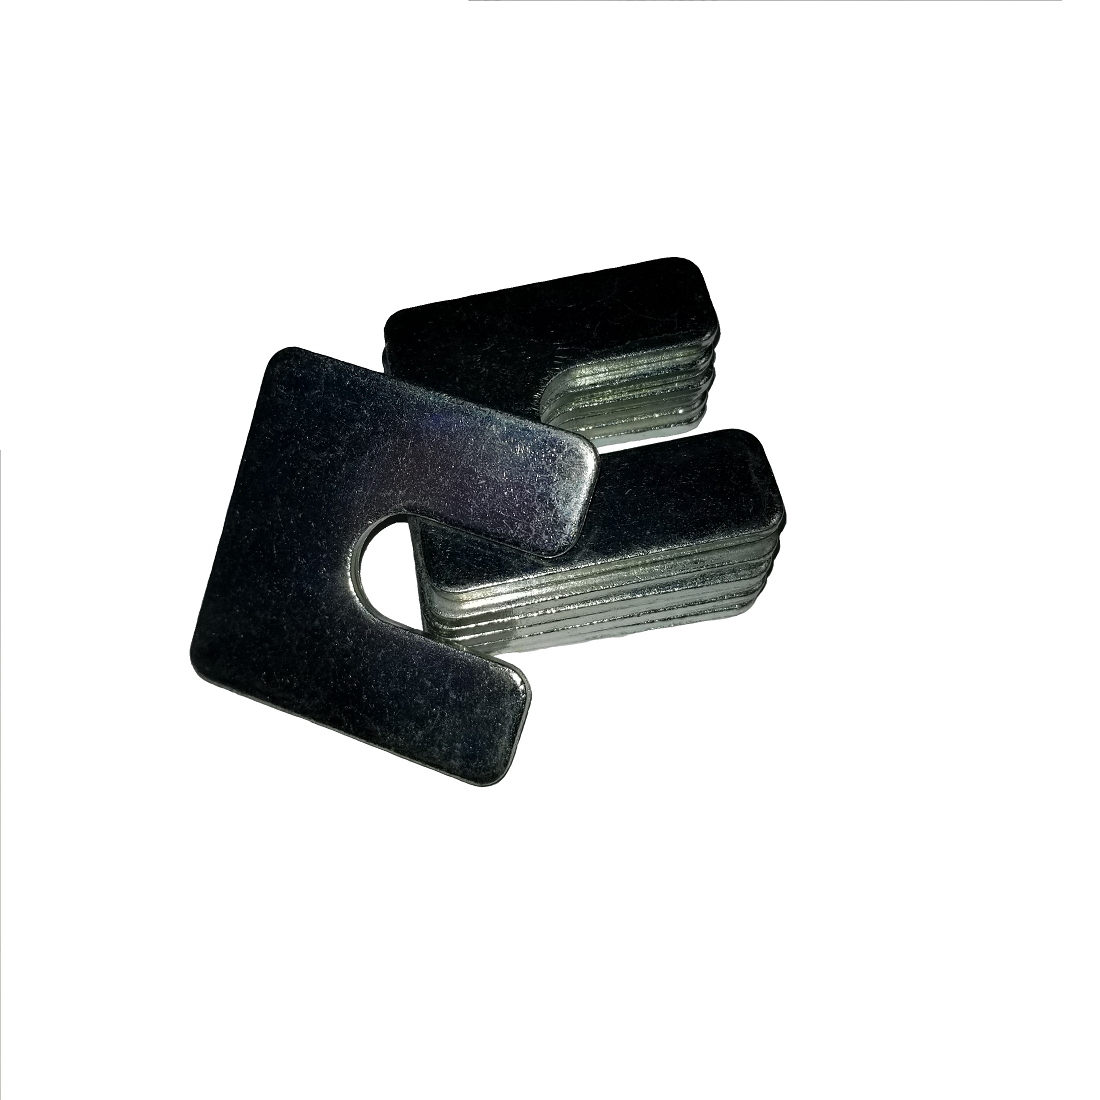 Slotted Square Washer - 0.875 ID, 2.375 OD, 0.060 Thick, Low Carbon Steel - Soft